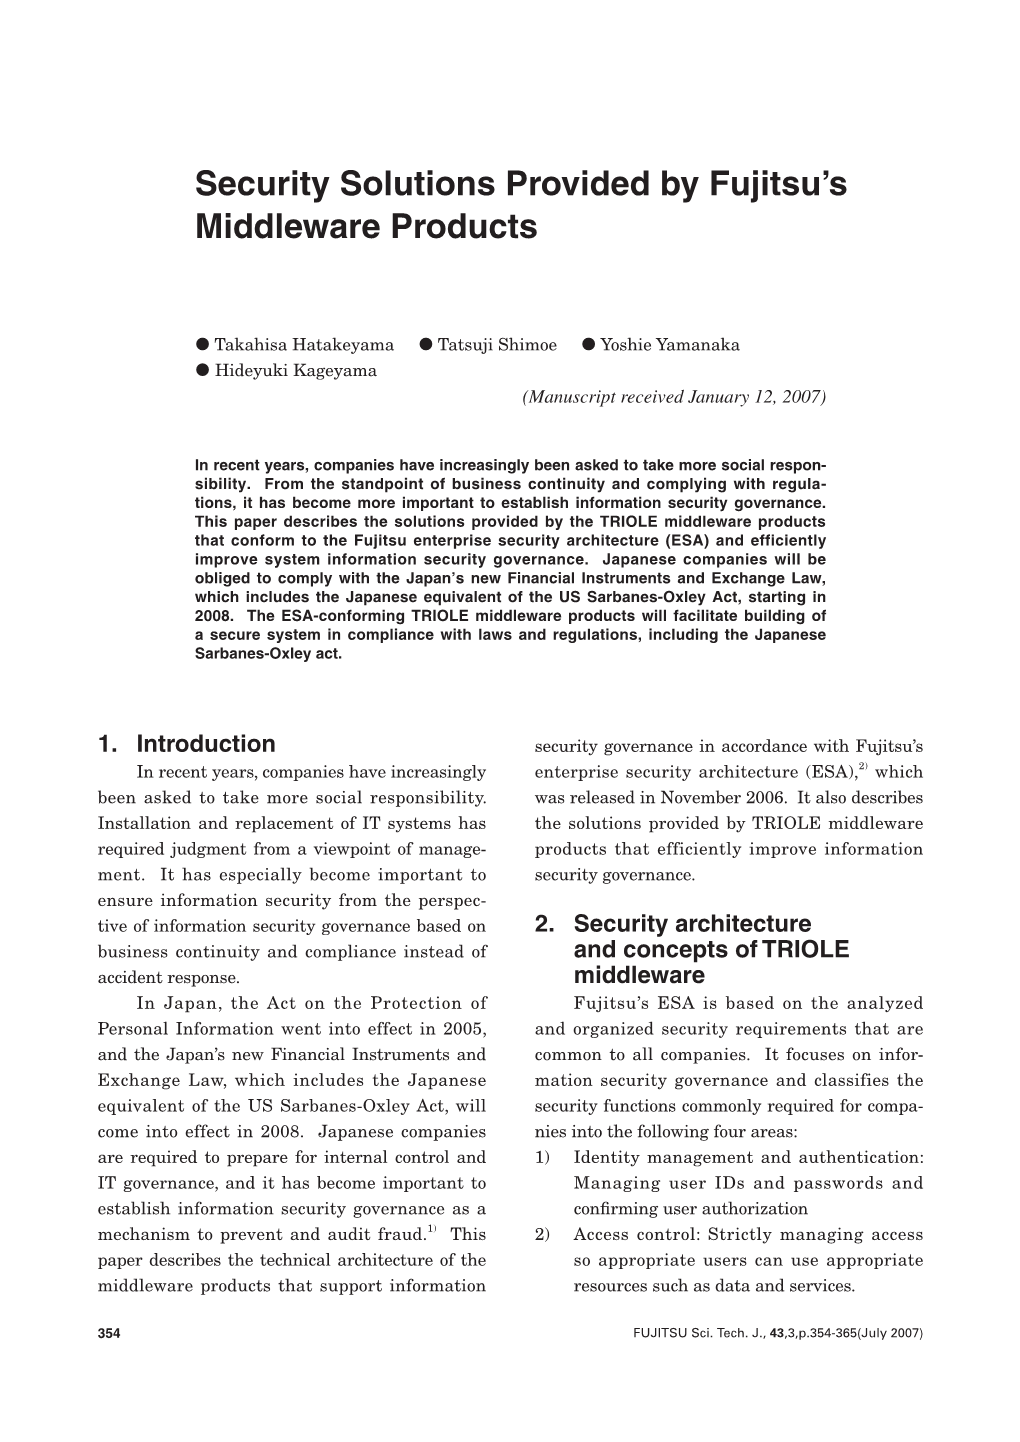 Security Solutions Provided by Fujitsu's Middleware Products